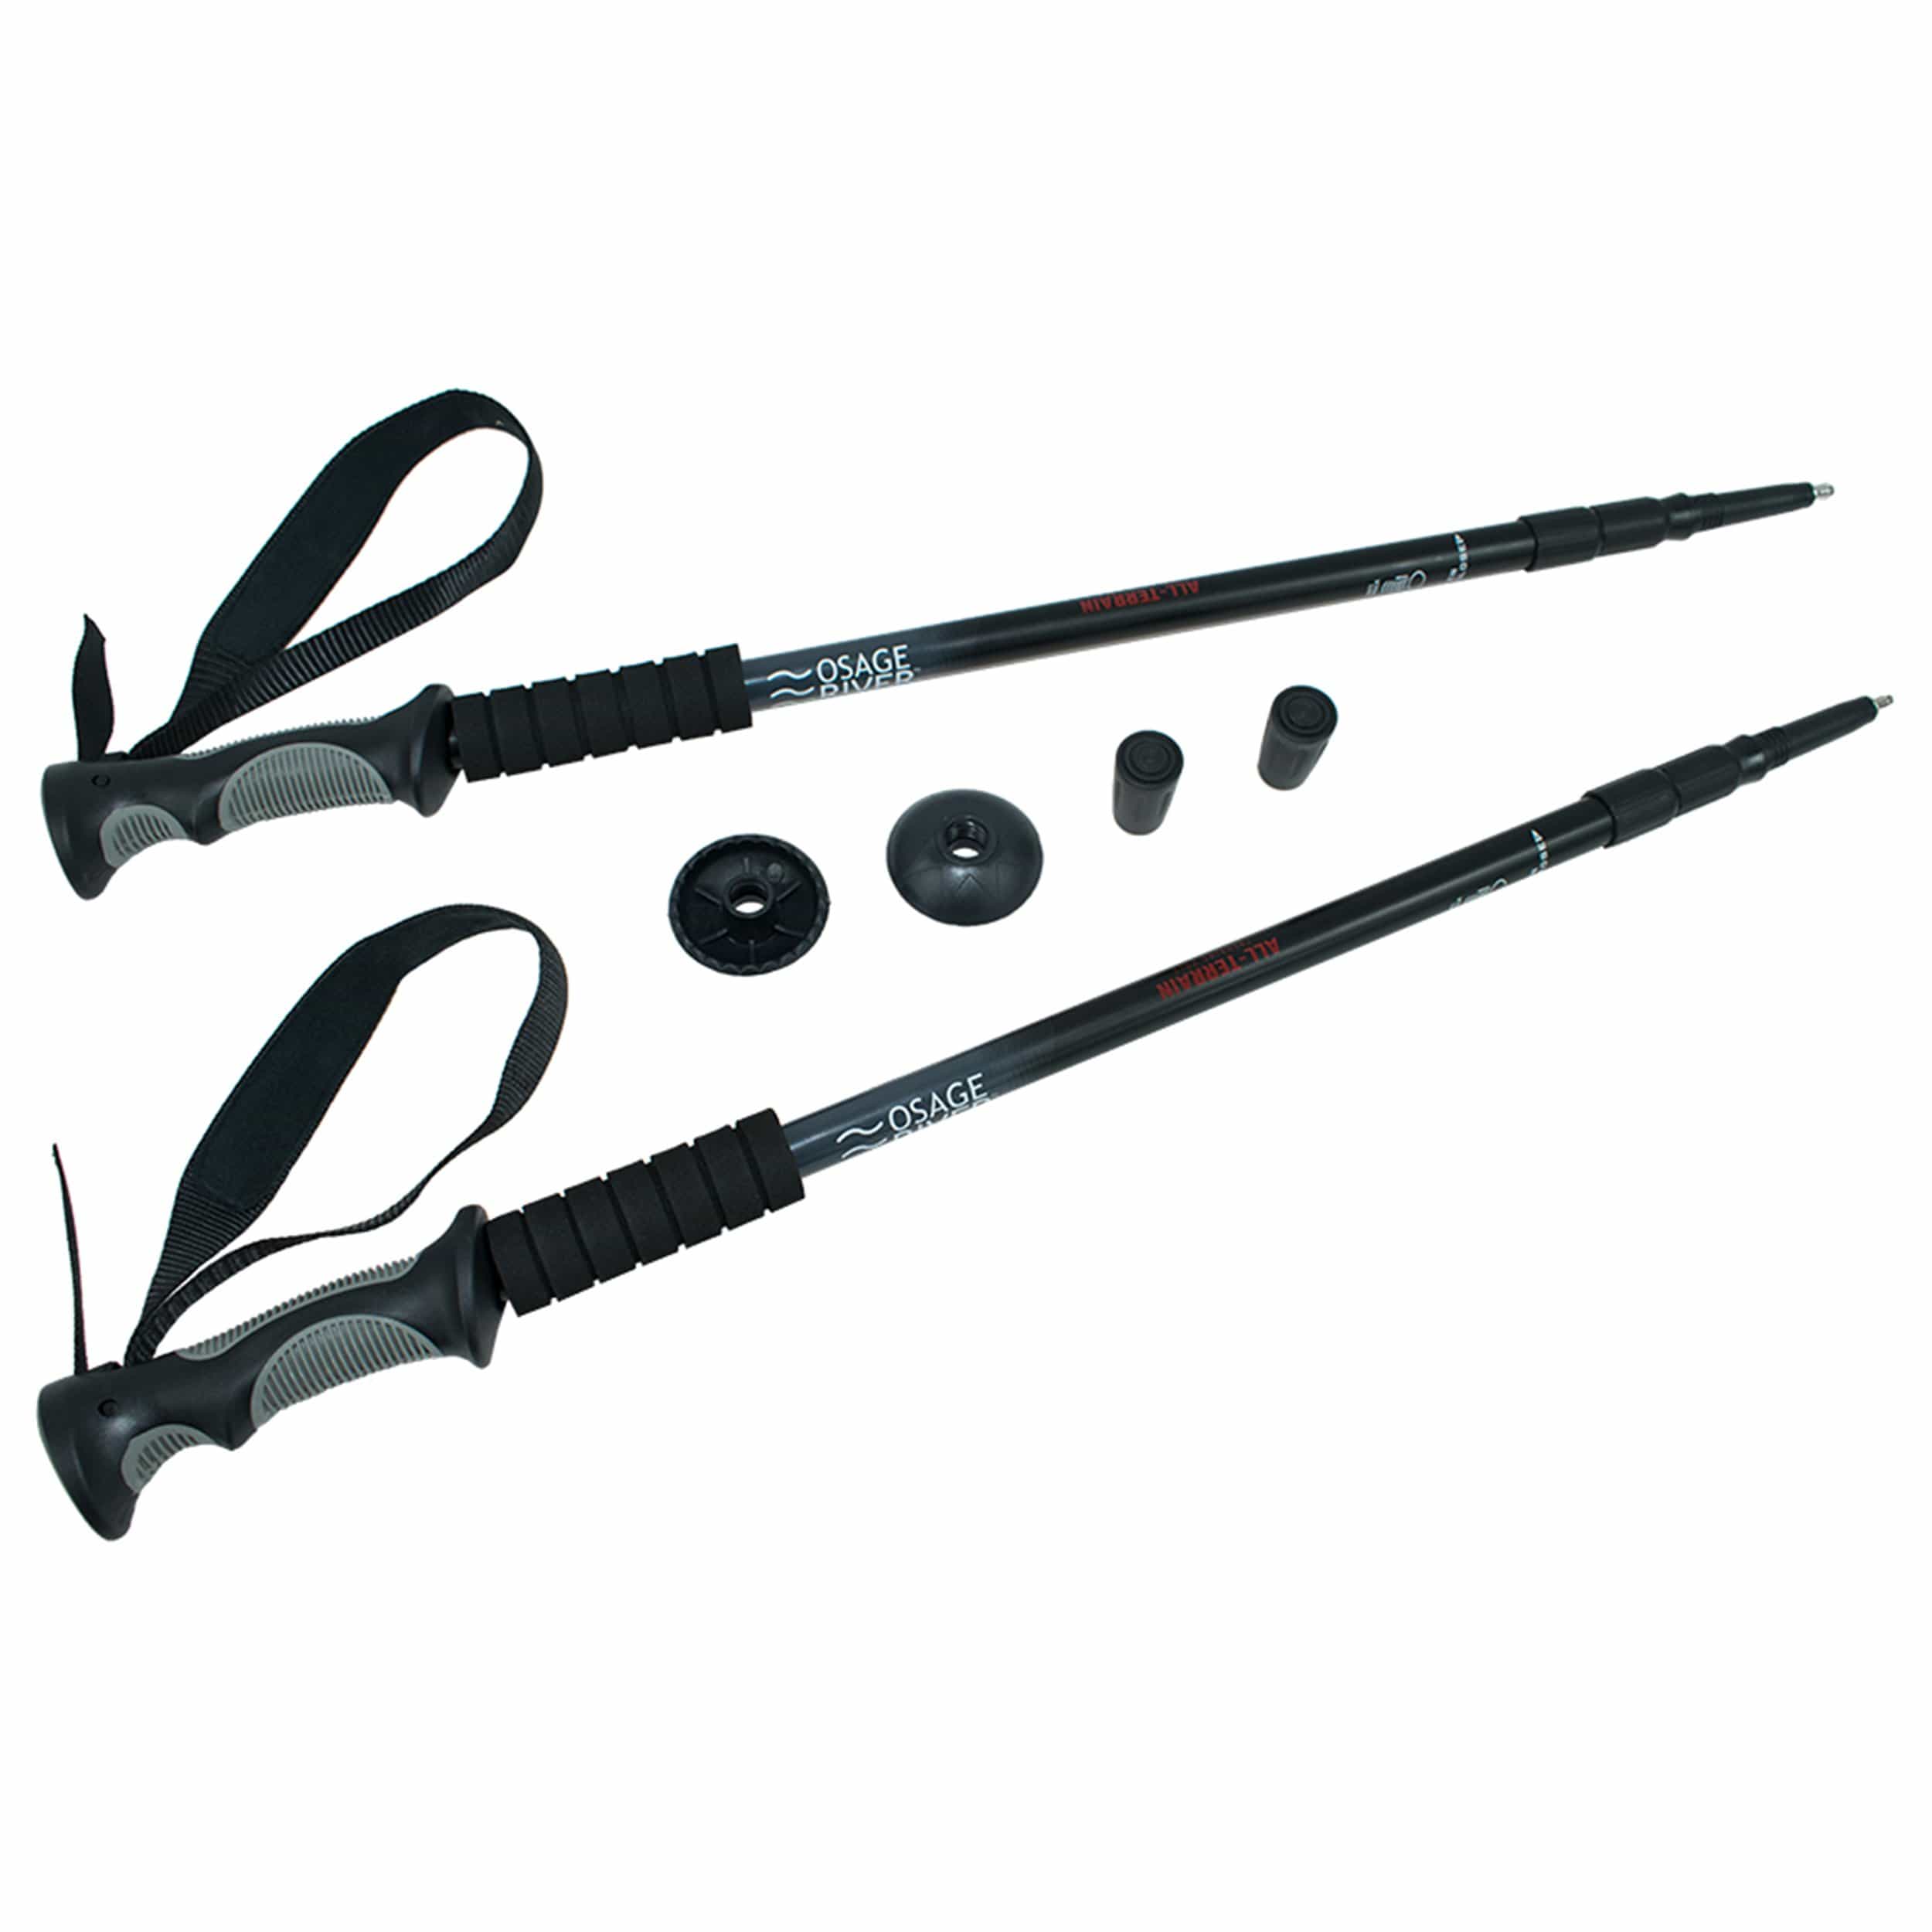 OSAGE RIVER Camping & Outdoor : Accessories Osage River Trail Trekking Poles 1-Pair Black